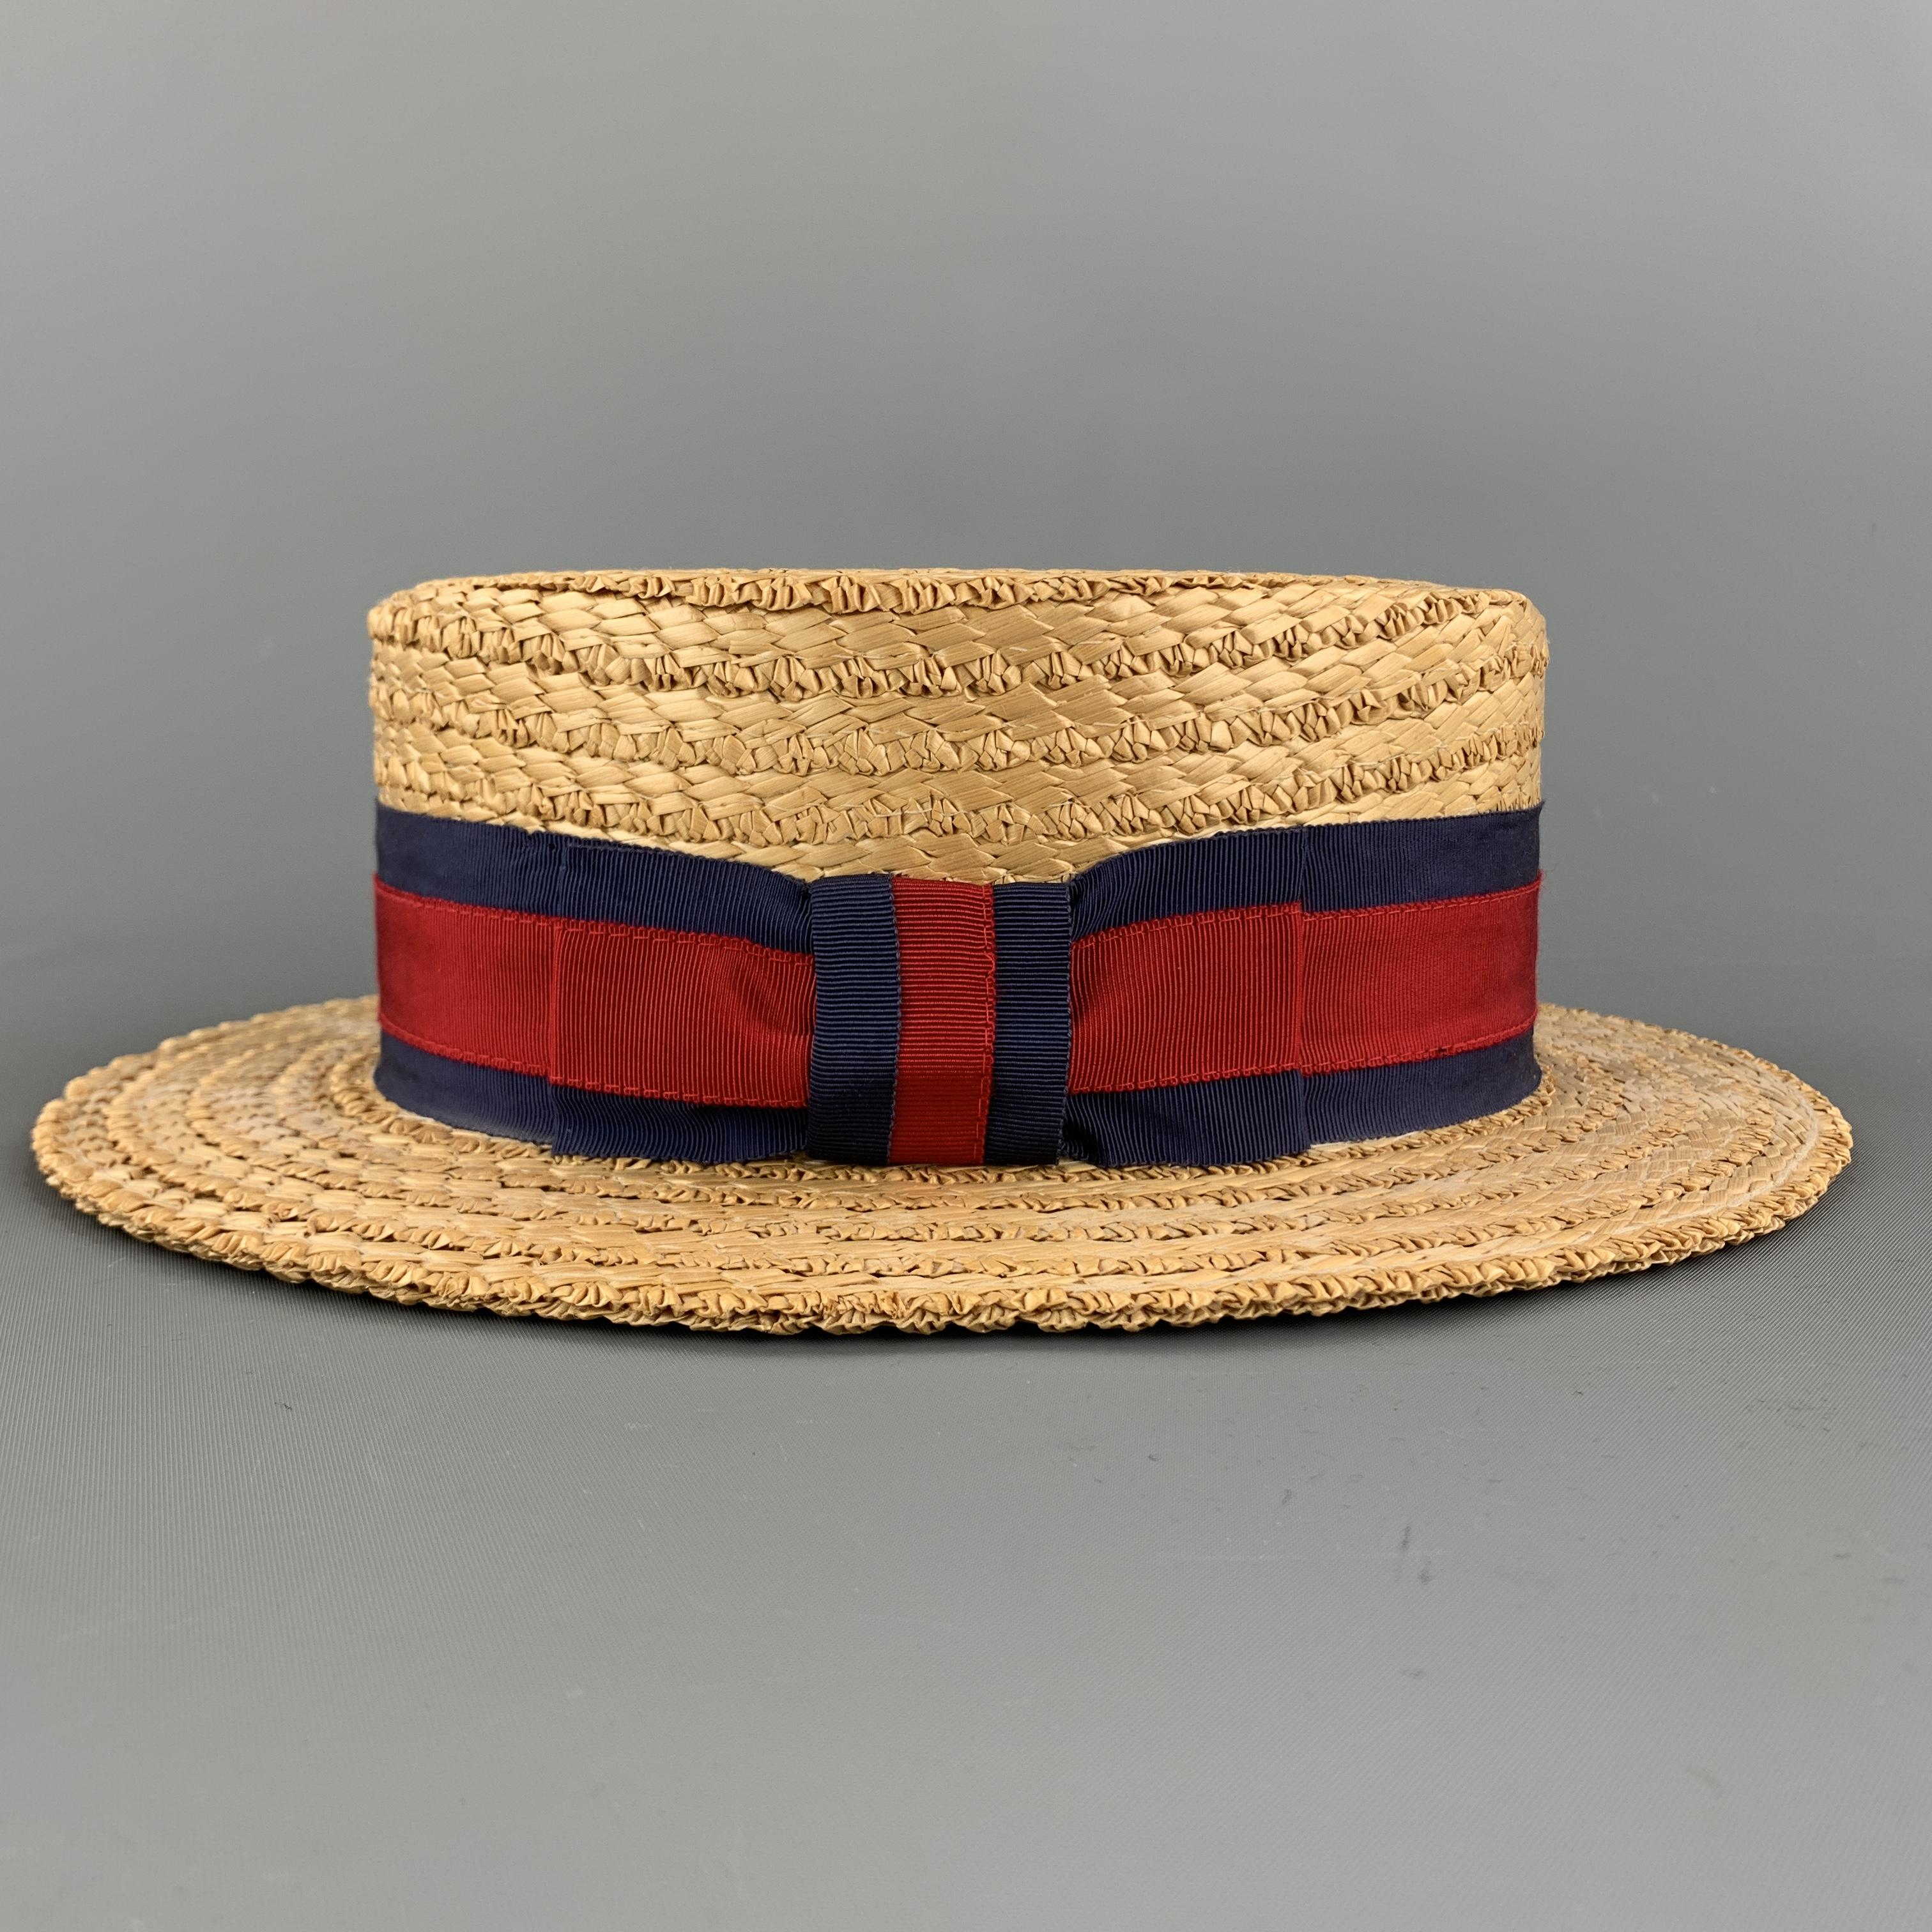 red boater hat